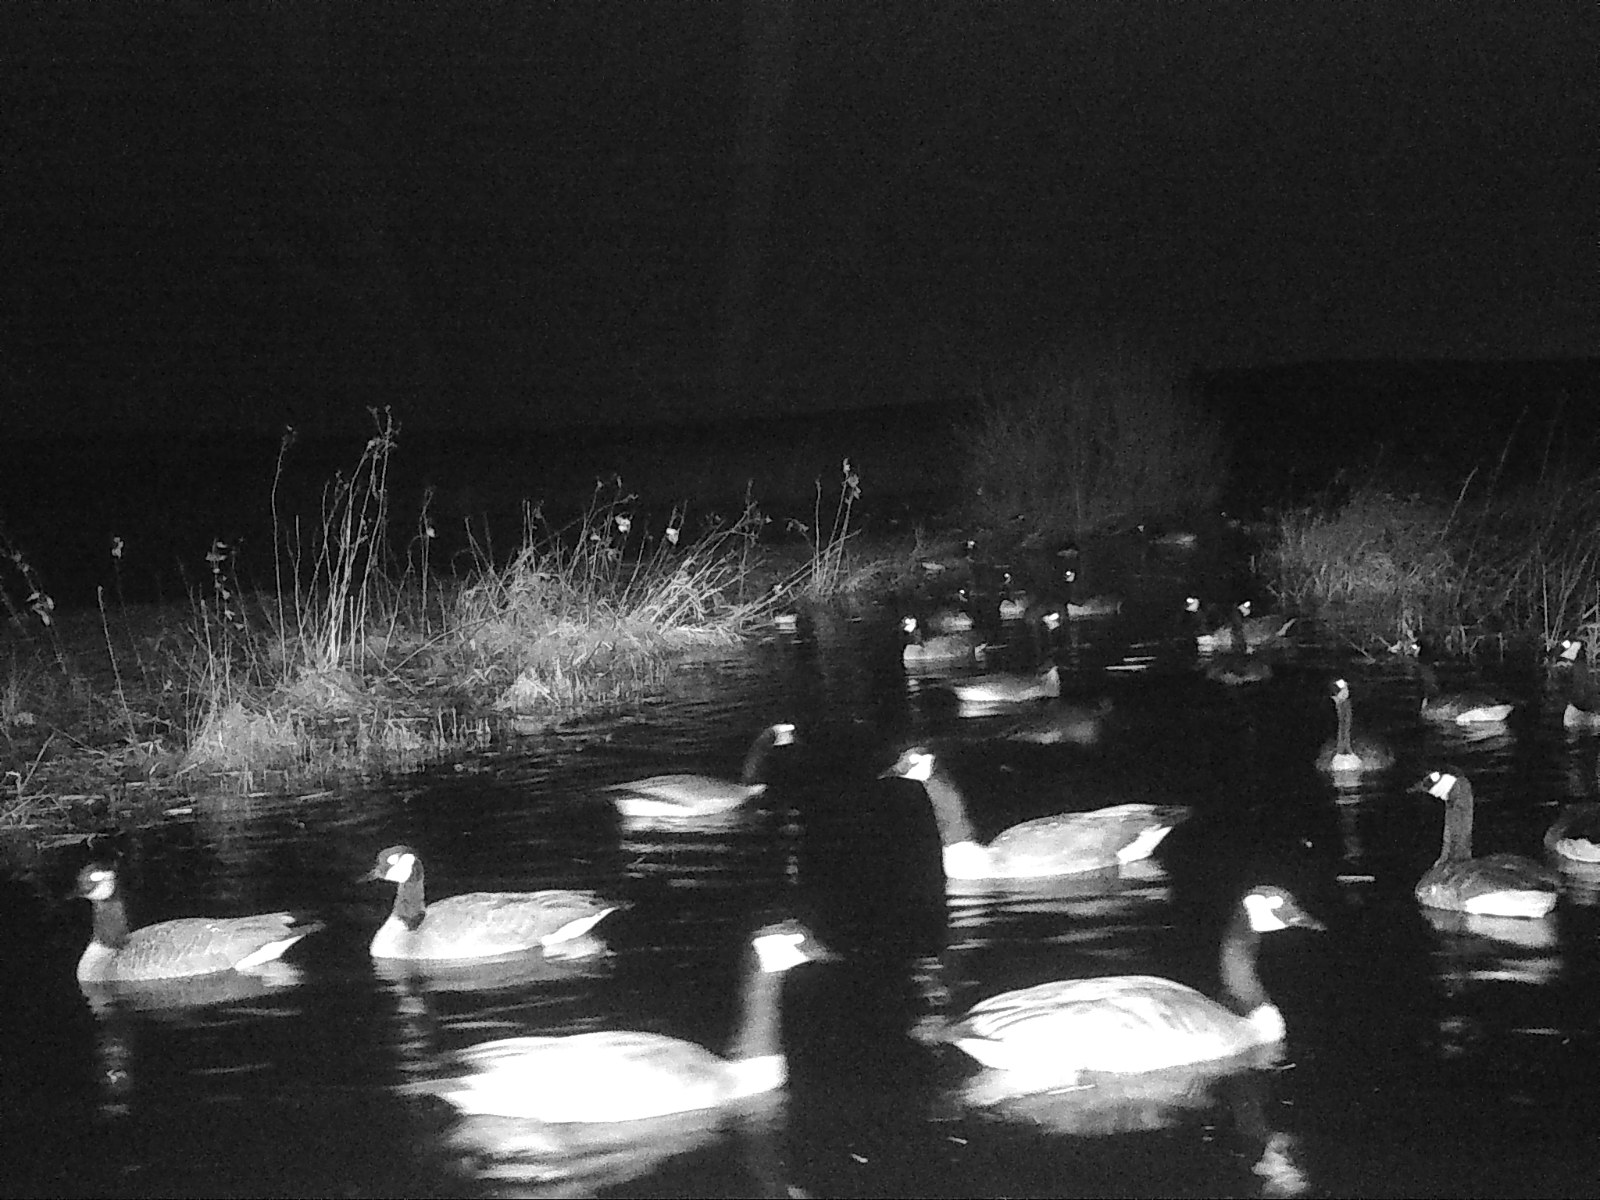 Canada geese at night